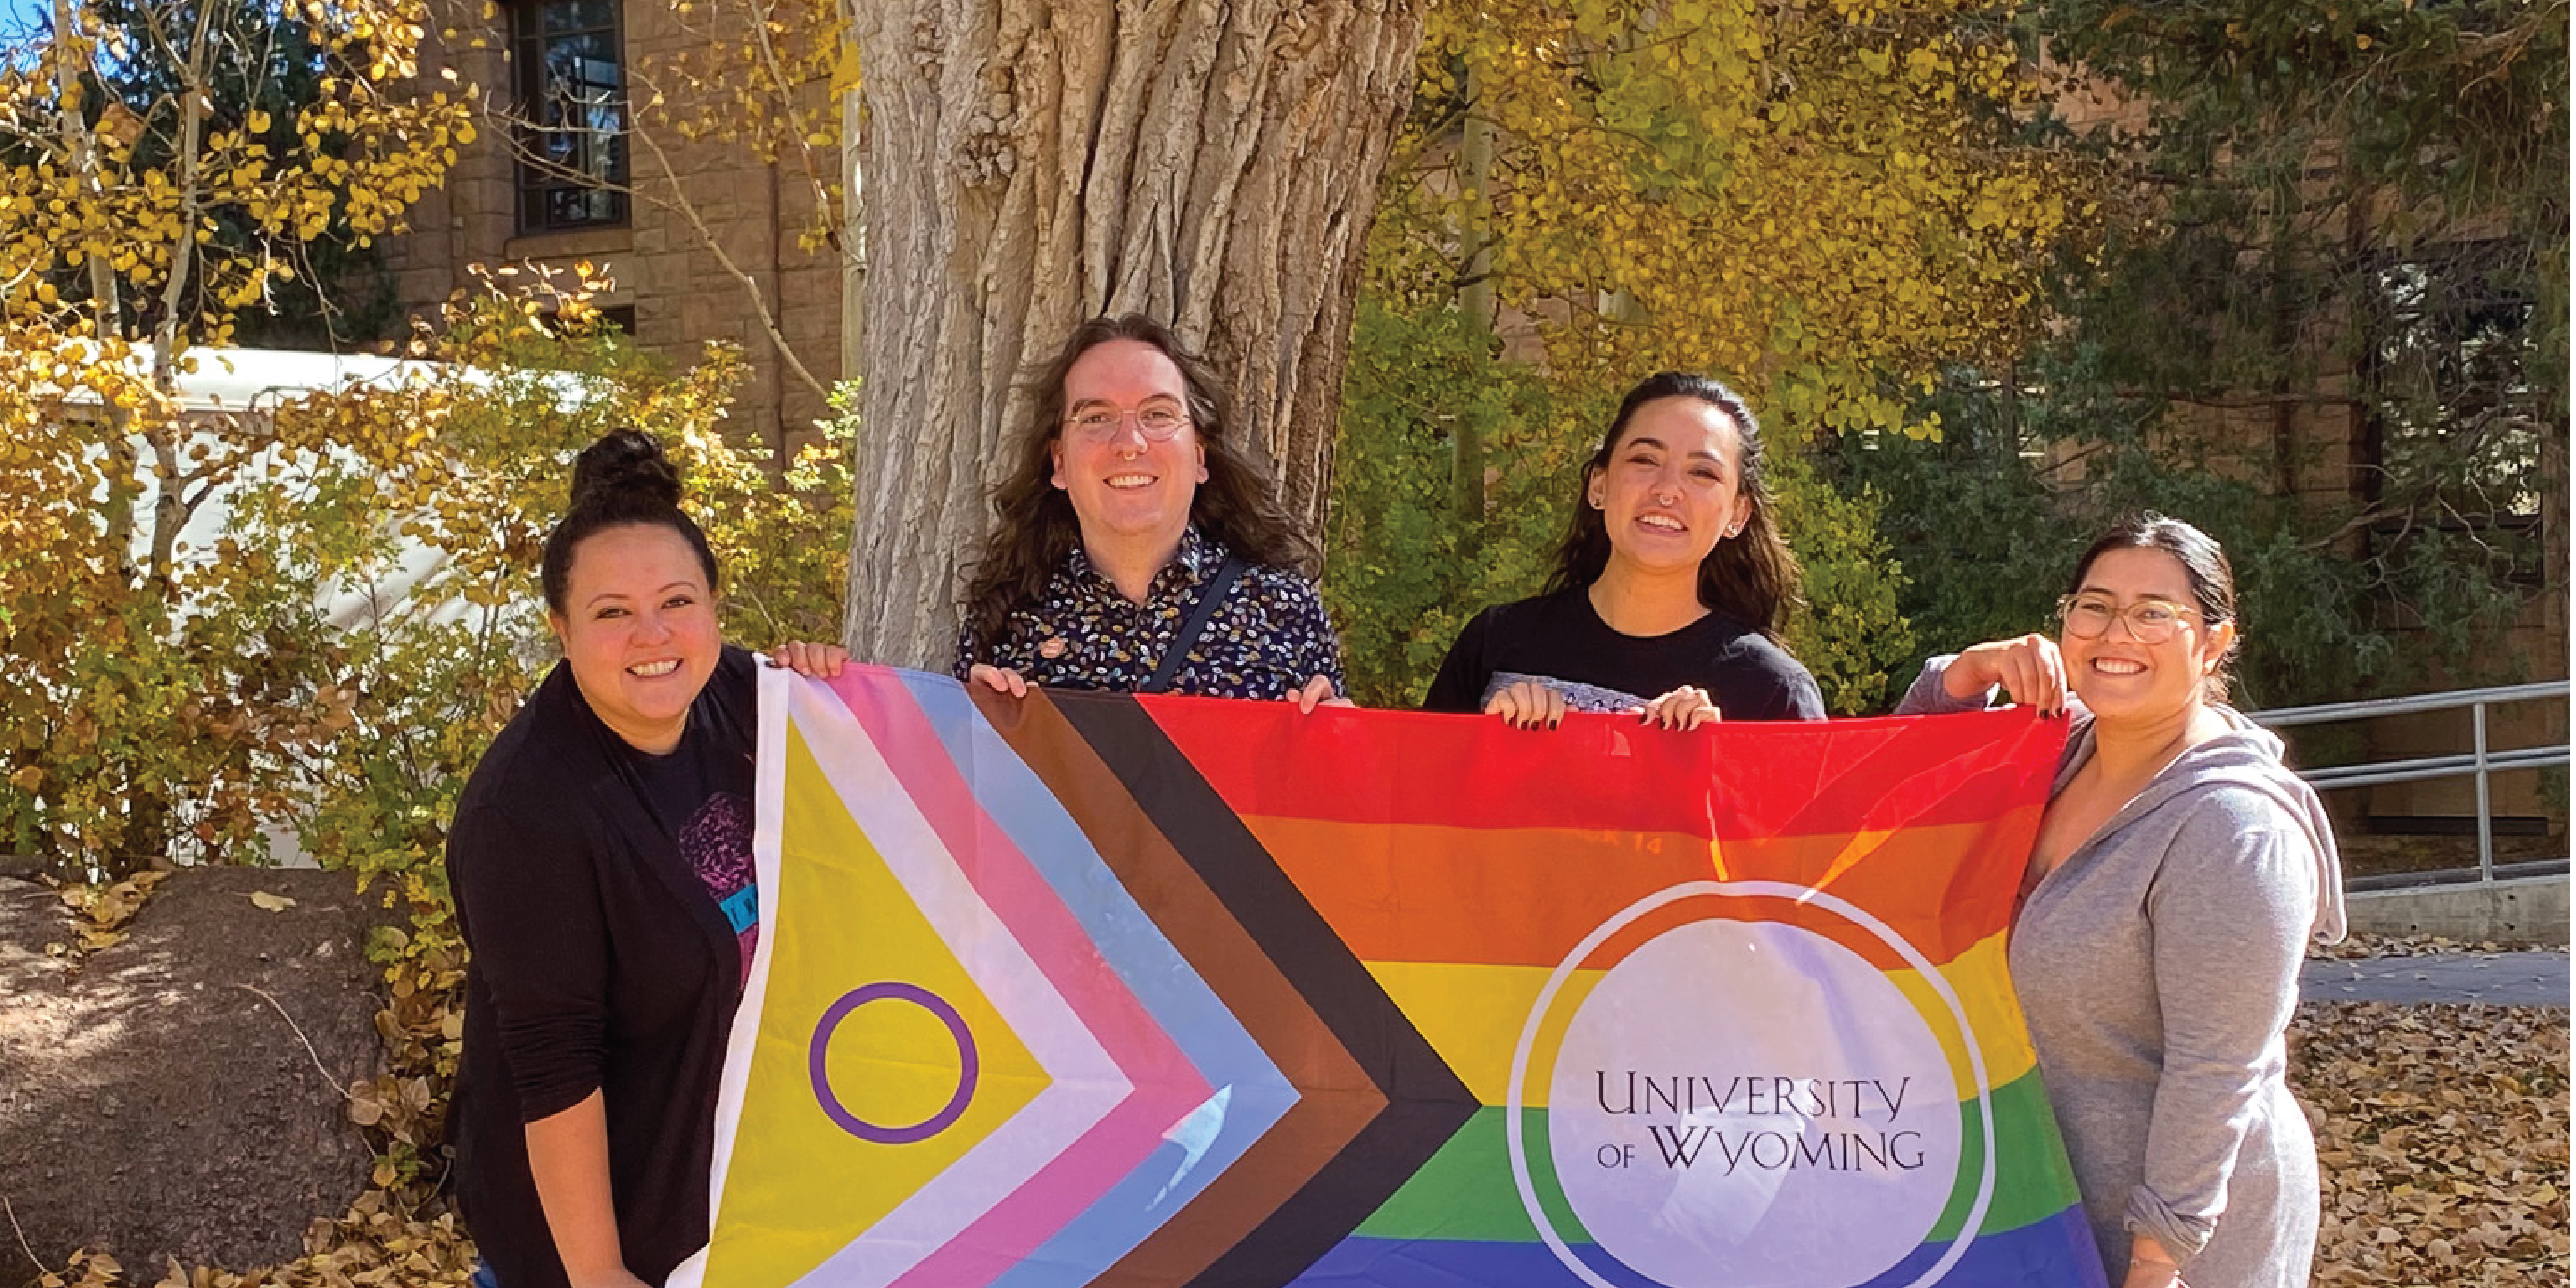 MA staff outside of the Wyoming Union with a progressive pride flag